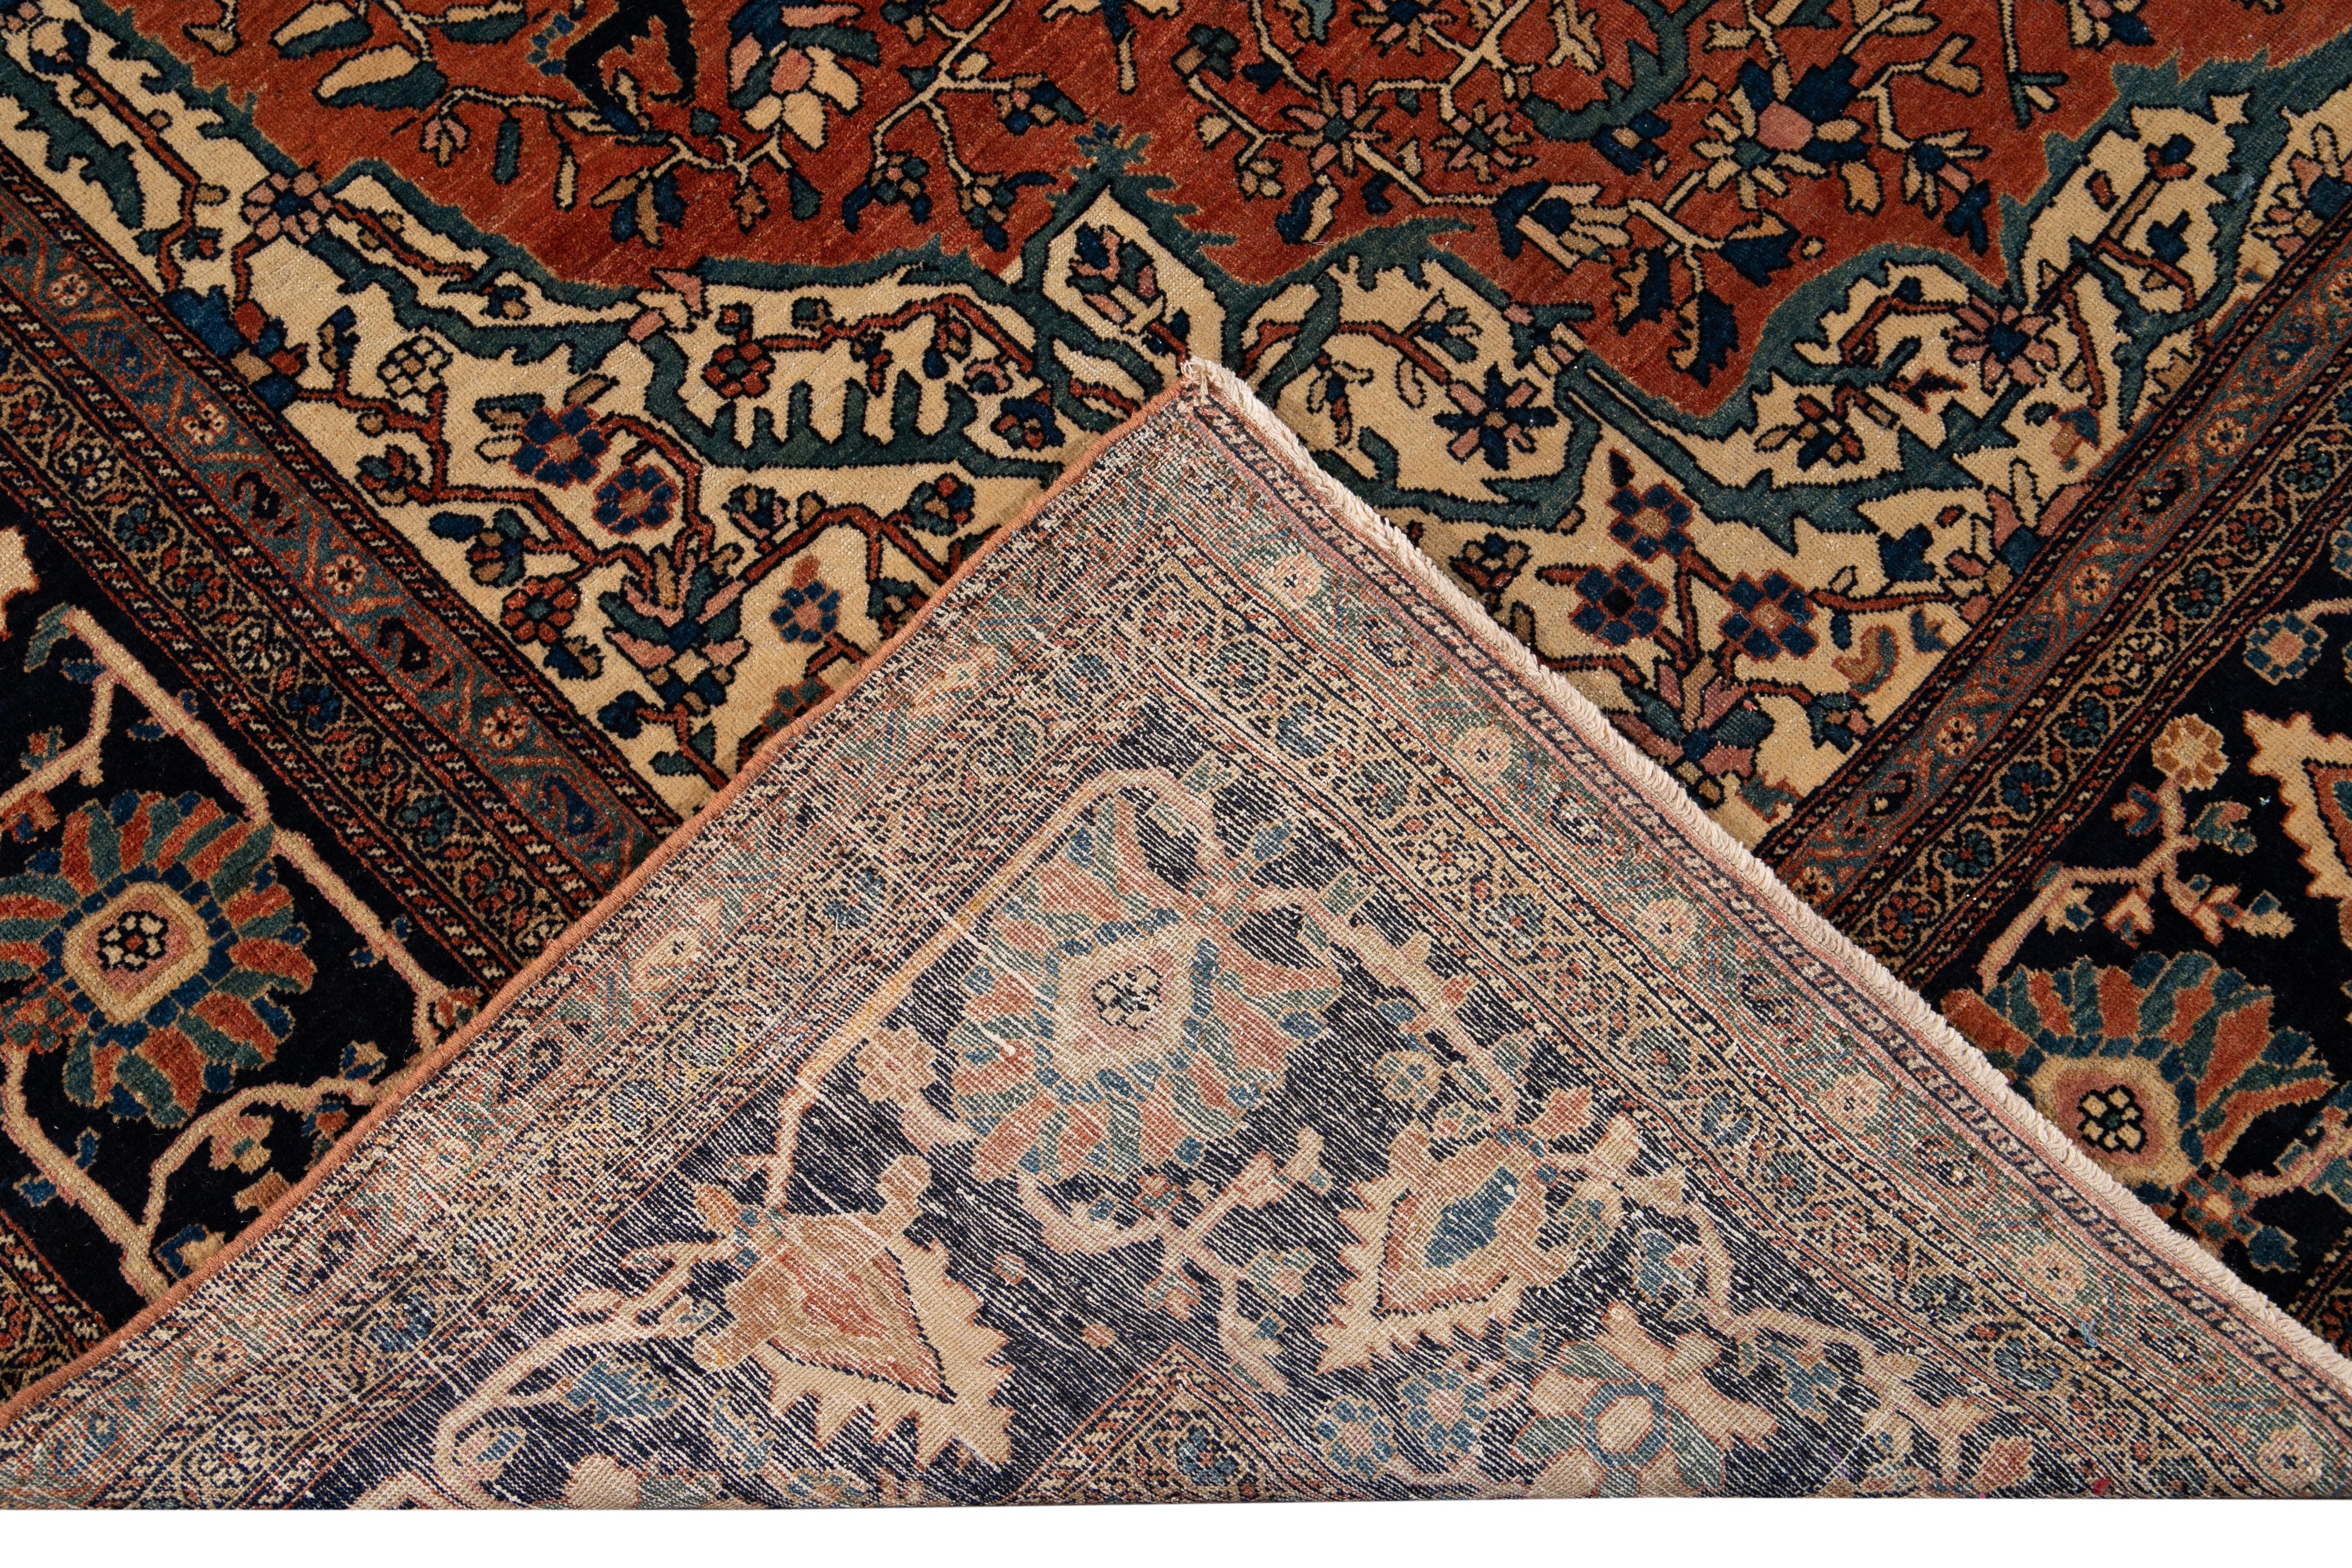 Beautiful Antique Farahan hand-knotted wool rug with an orange-rust color field. This Persian rug has a designed dark blue frame with multicolor accents on a Classic floral medallion design.

This rug measure: 9' x 12'8